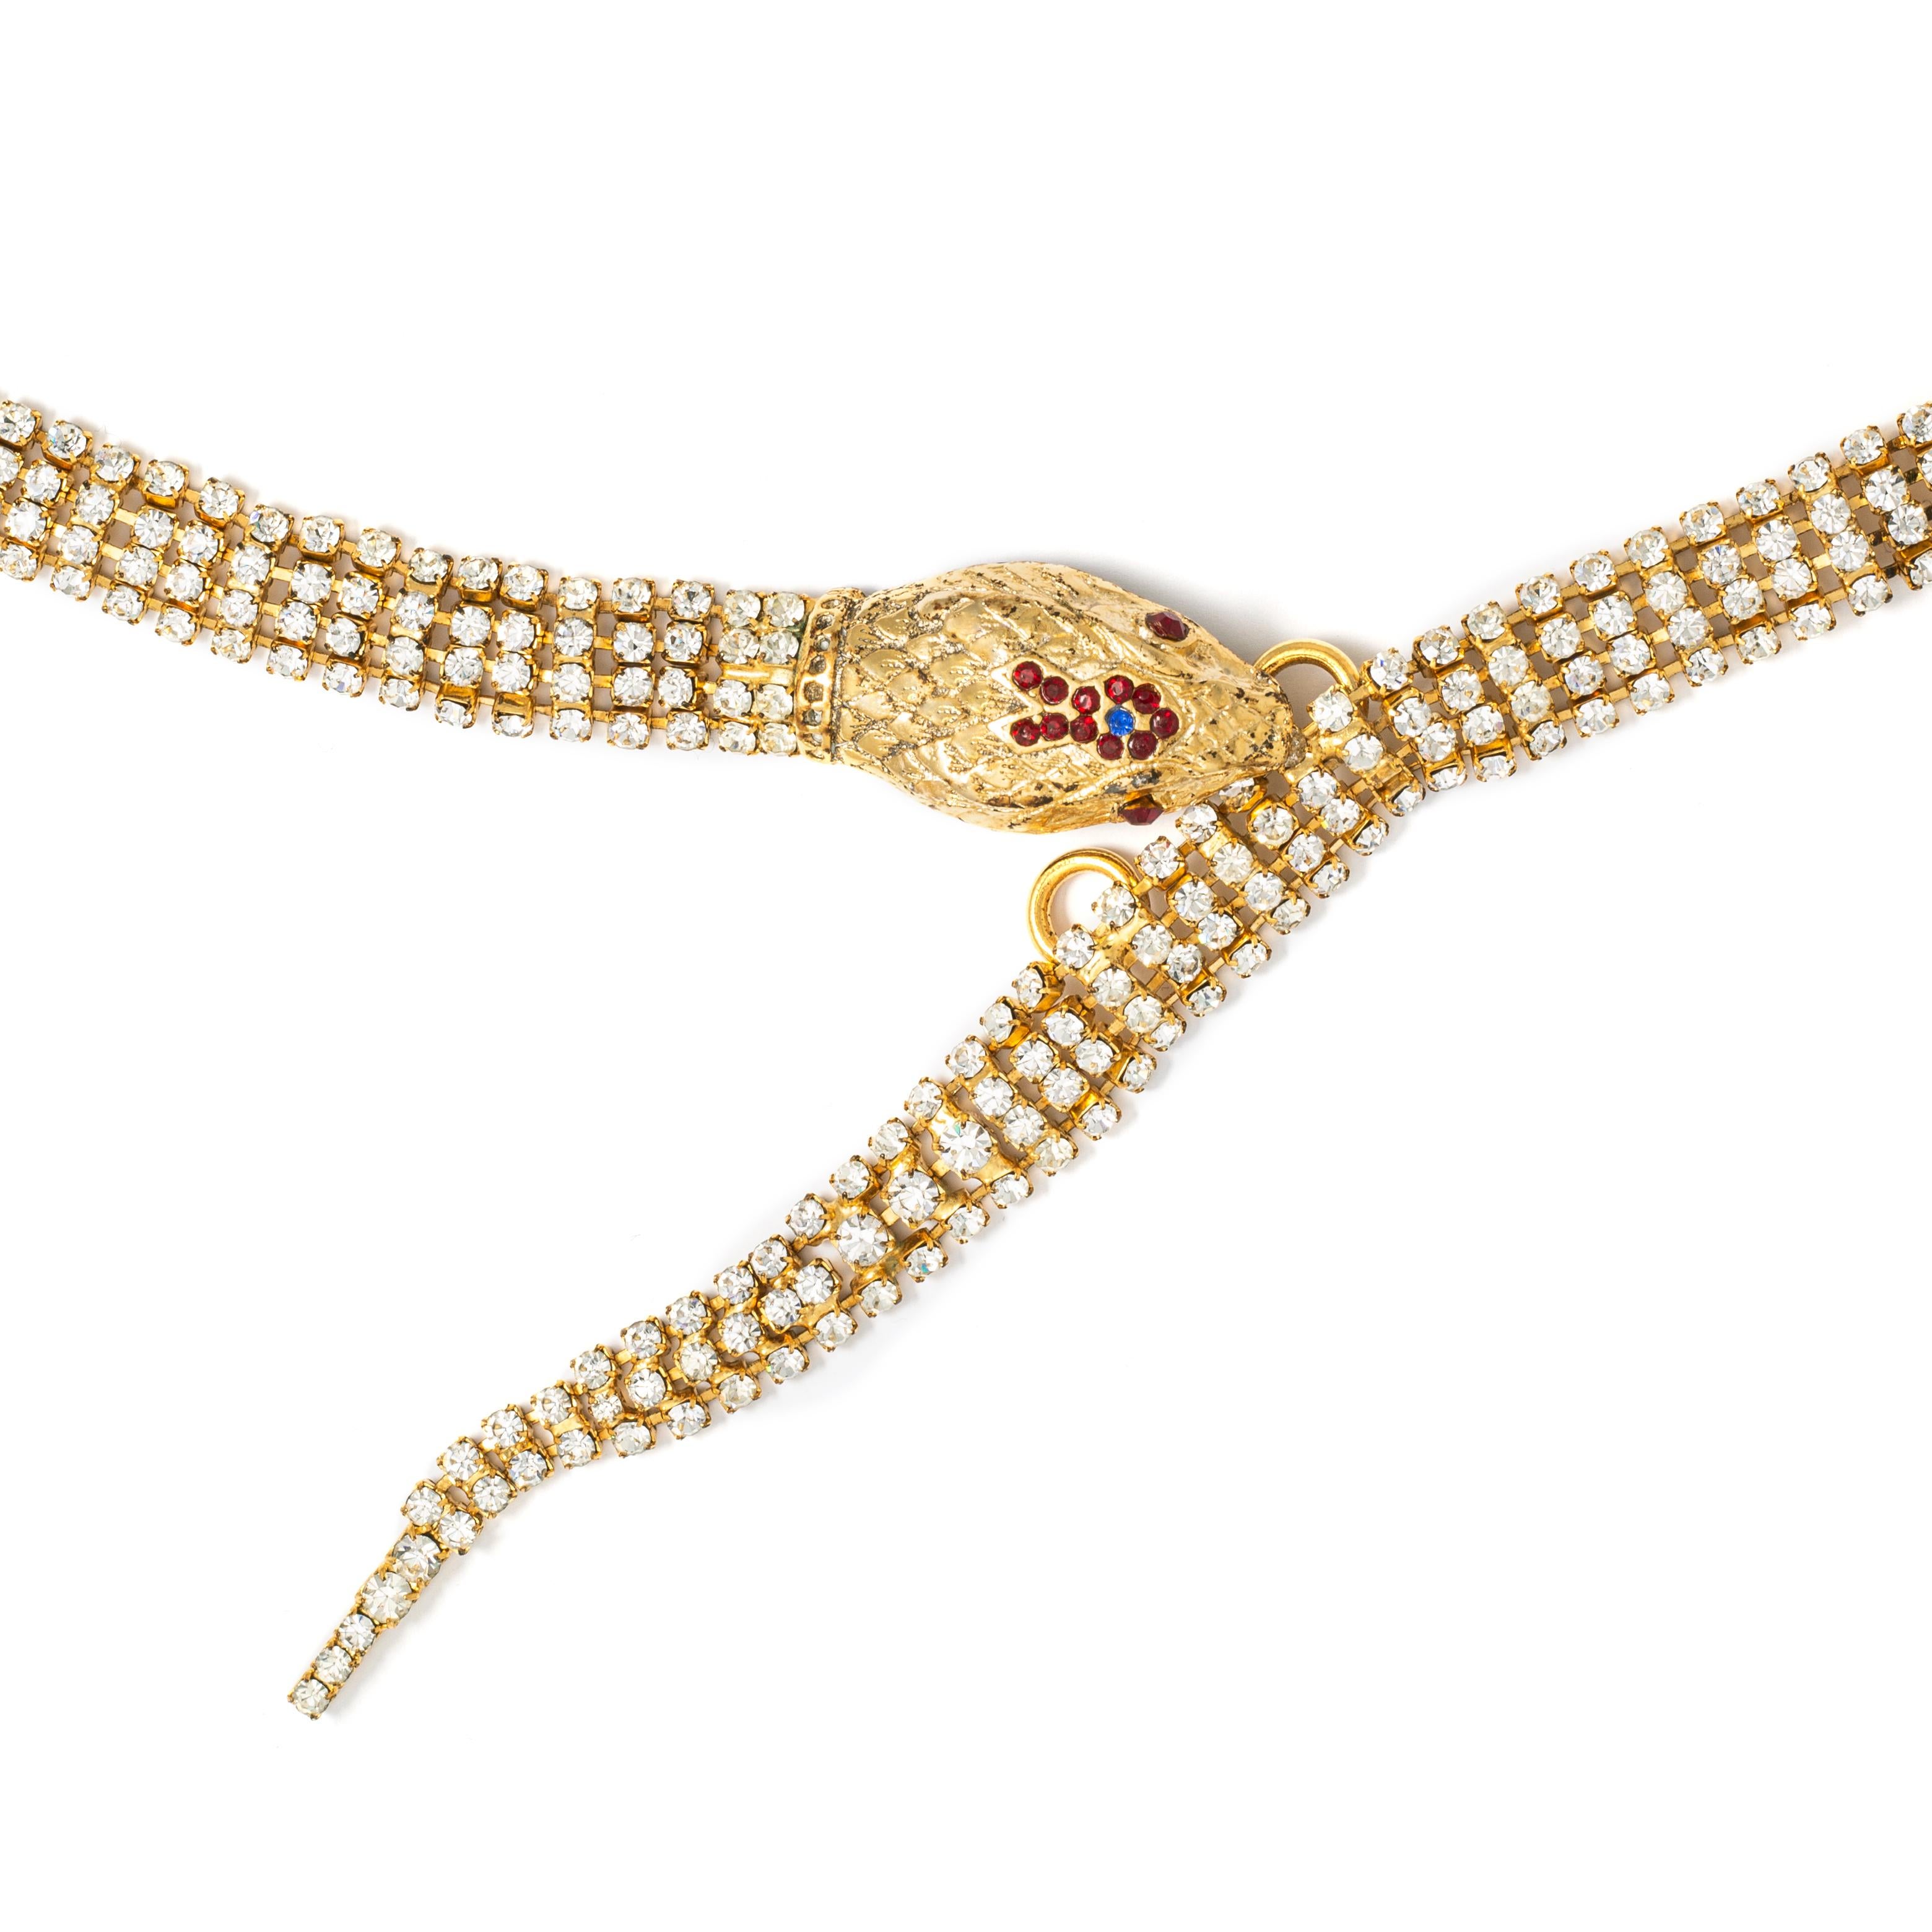 Snake Necklace. Paste.
By Ciribelli MONTE-CARLO.

Total Length: 104.00 centimeters.
Width:  1.20 centimeters.
Head: 3.50 centimeters x 2.00 centimeters.
Weight: 101.66 grams.
